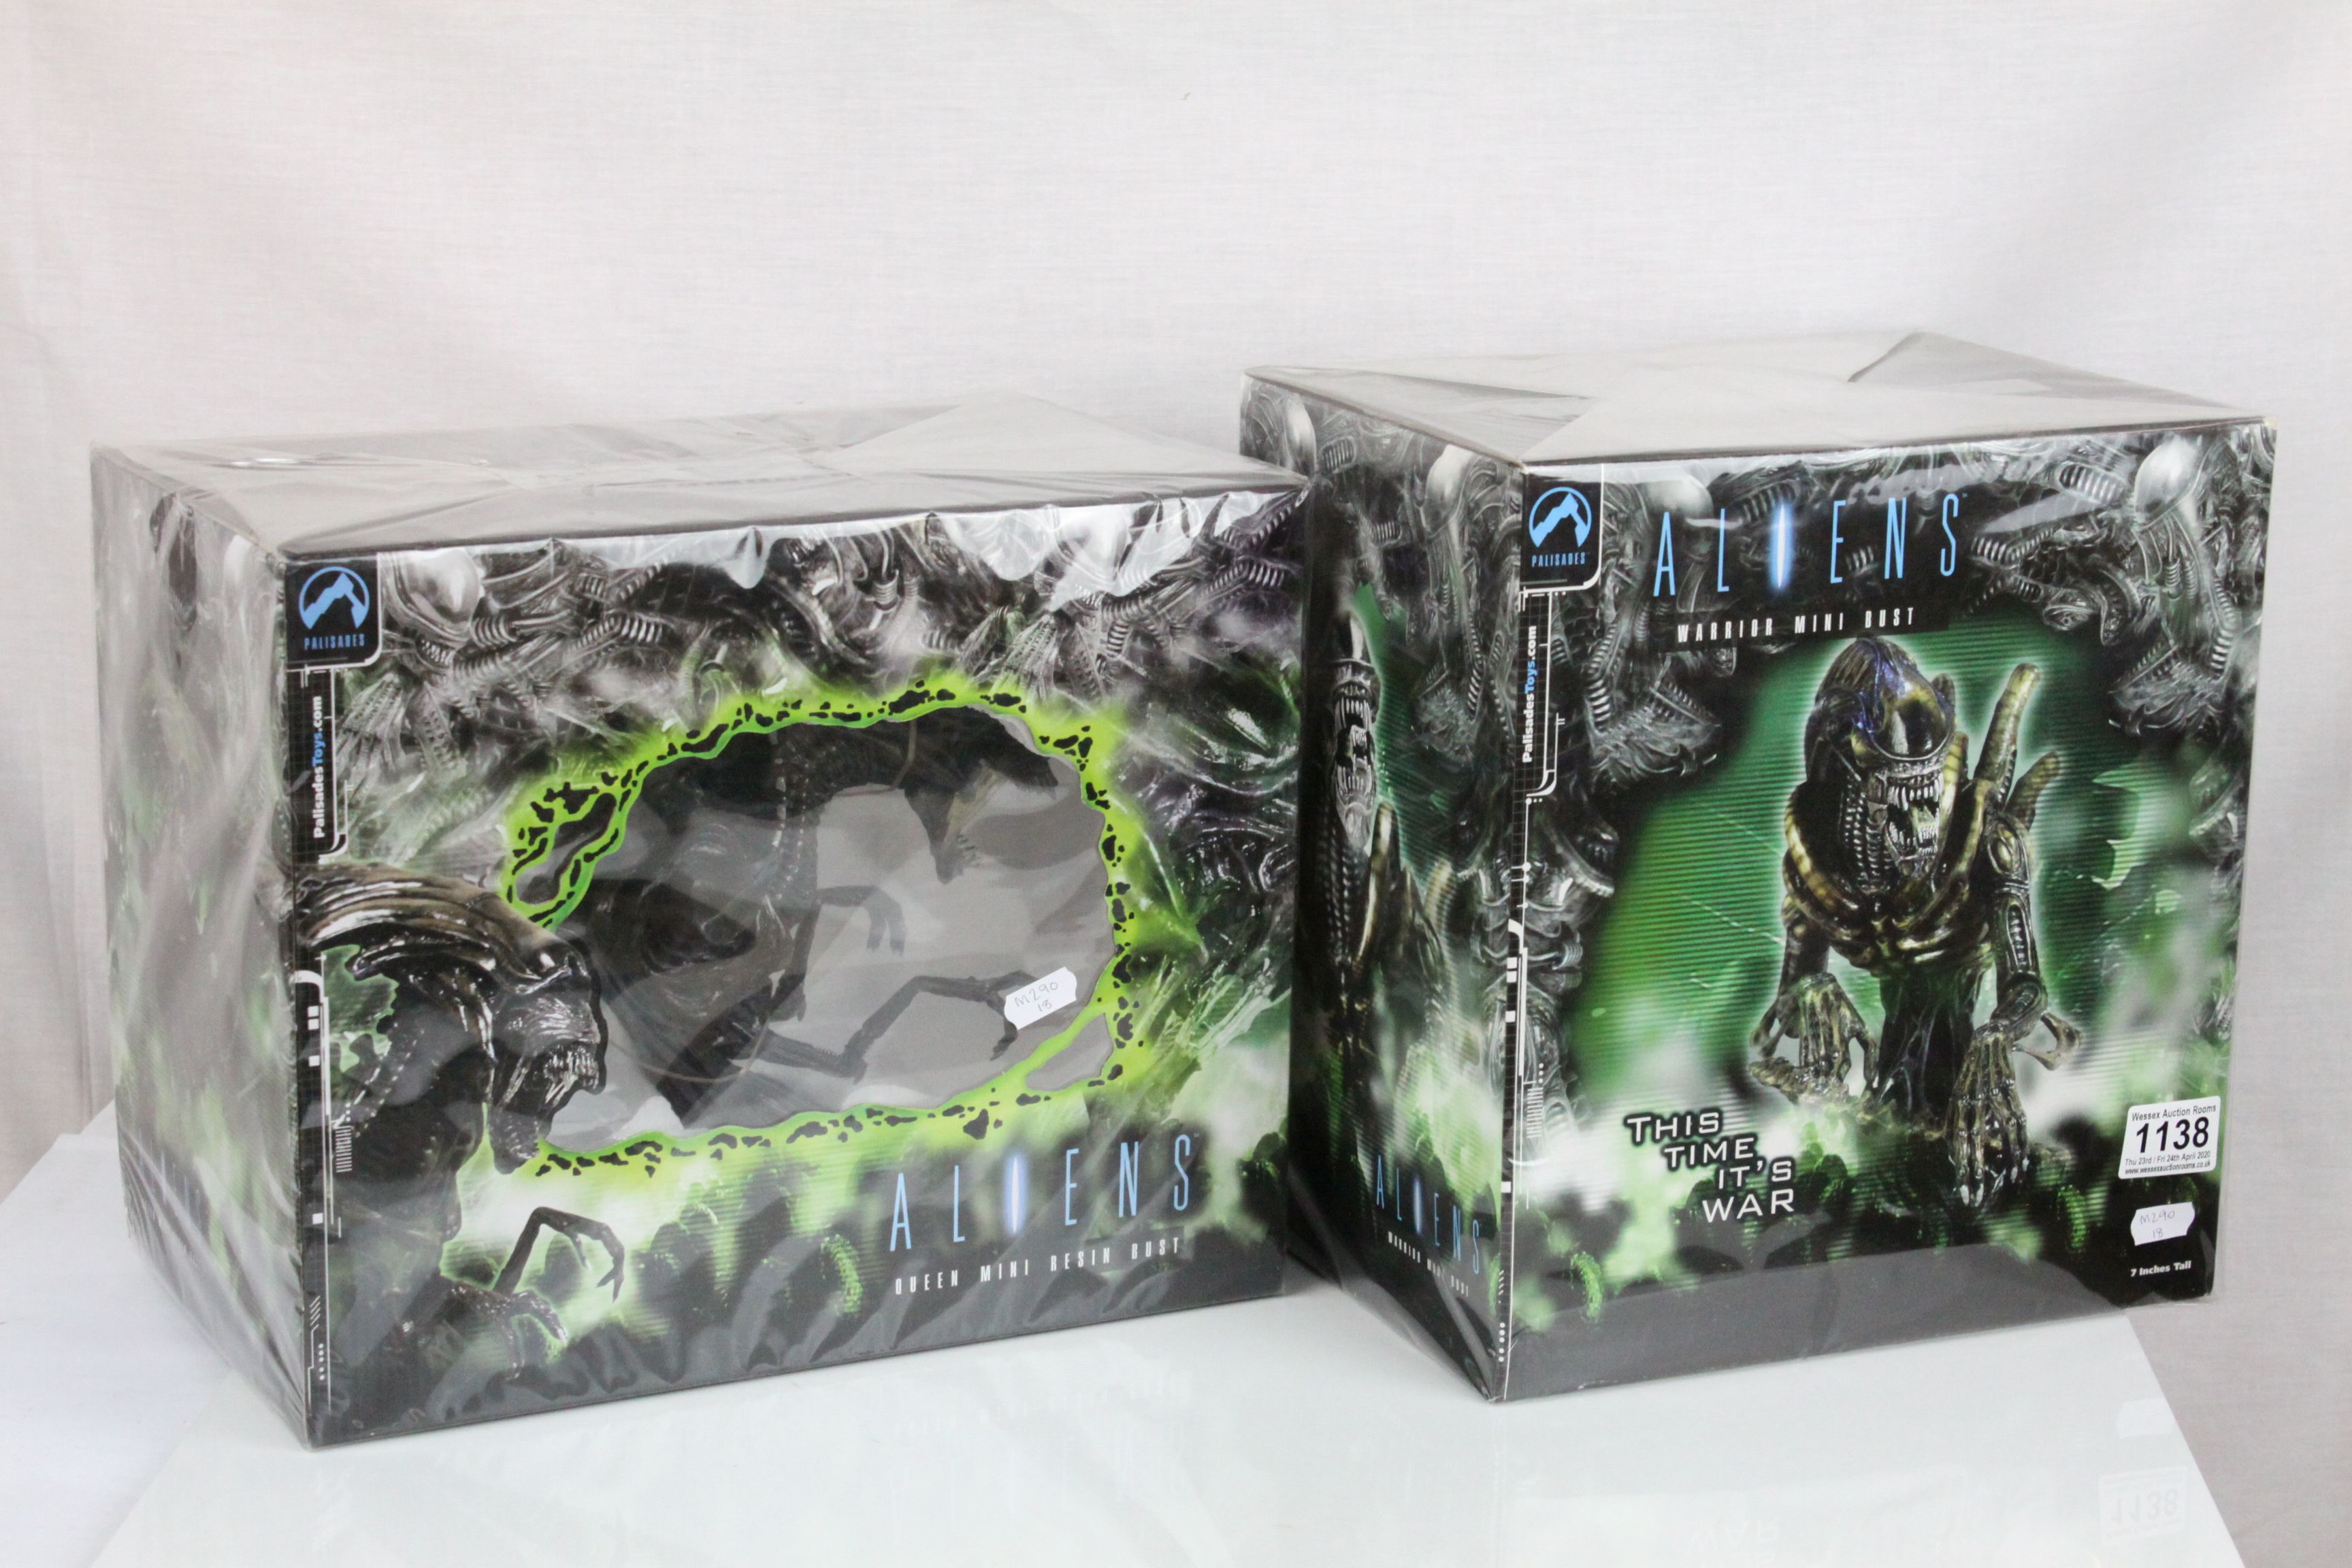 Two boxed Palisades Aliens busts to include Warrior Mini Bust and Queen Mini Resin Bust, both